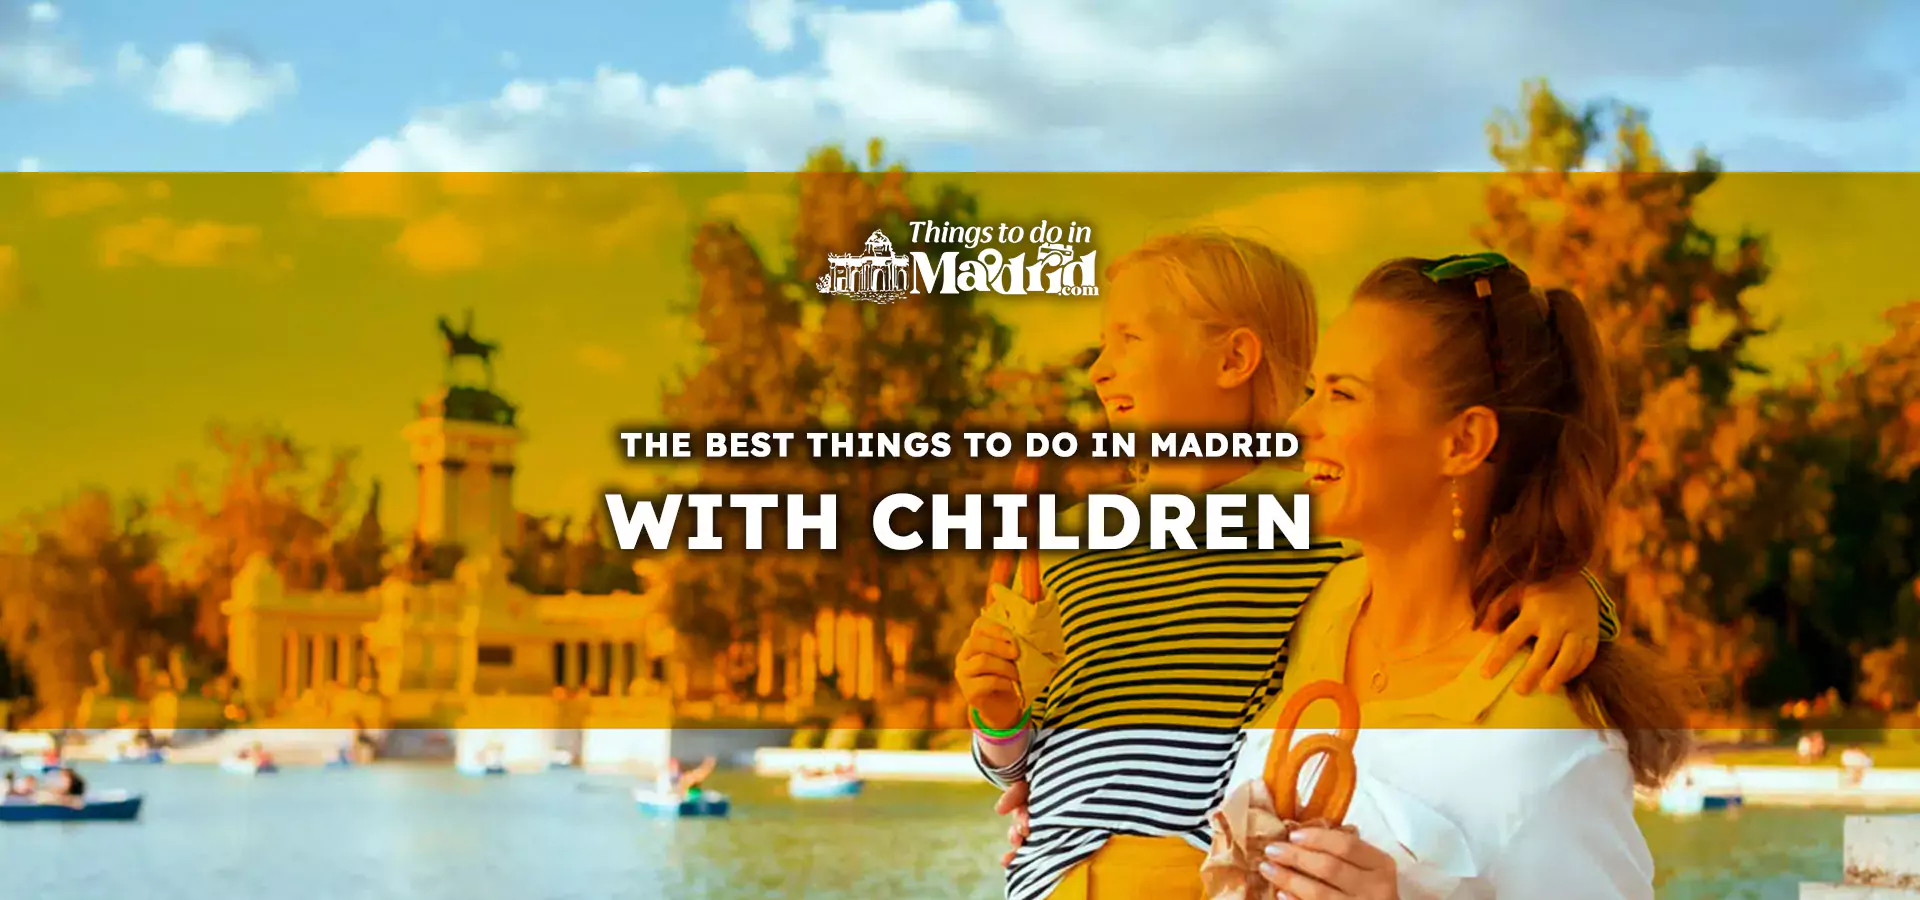 best-things-to-do-in-madrid-with-children-and-family